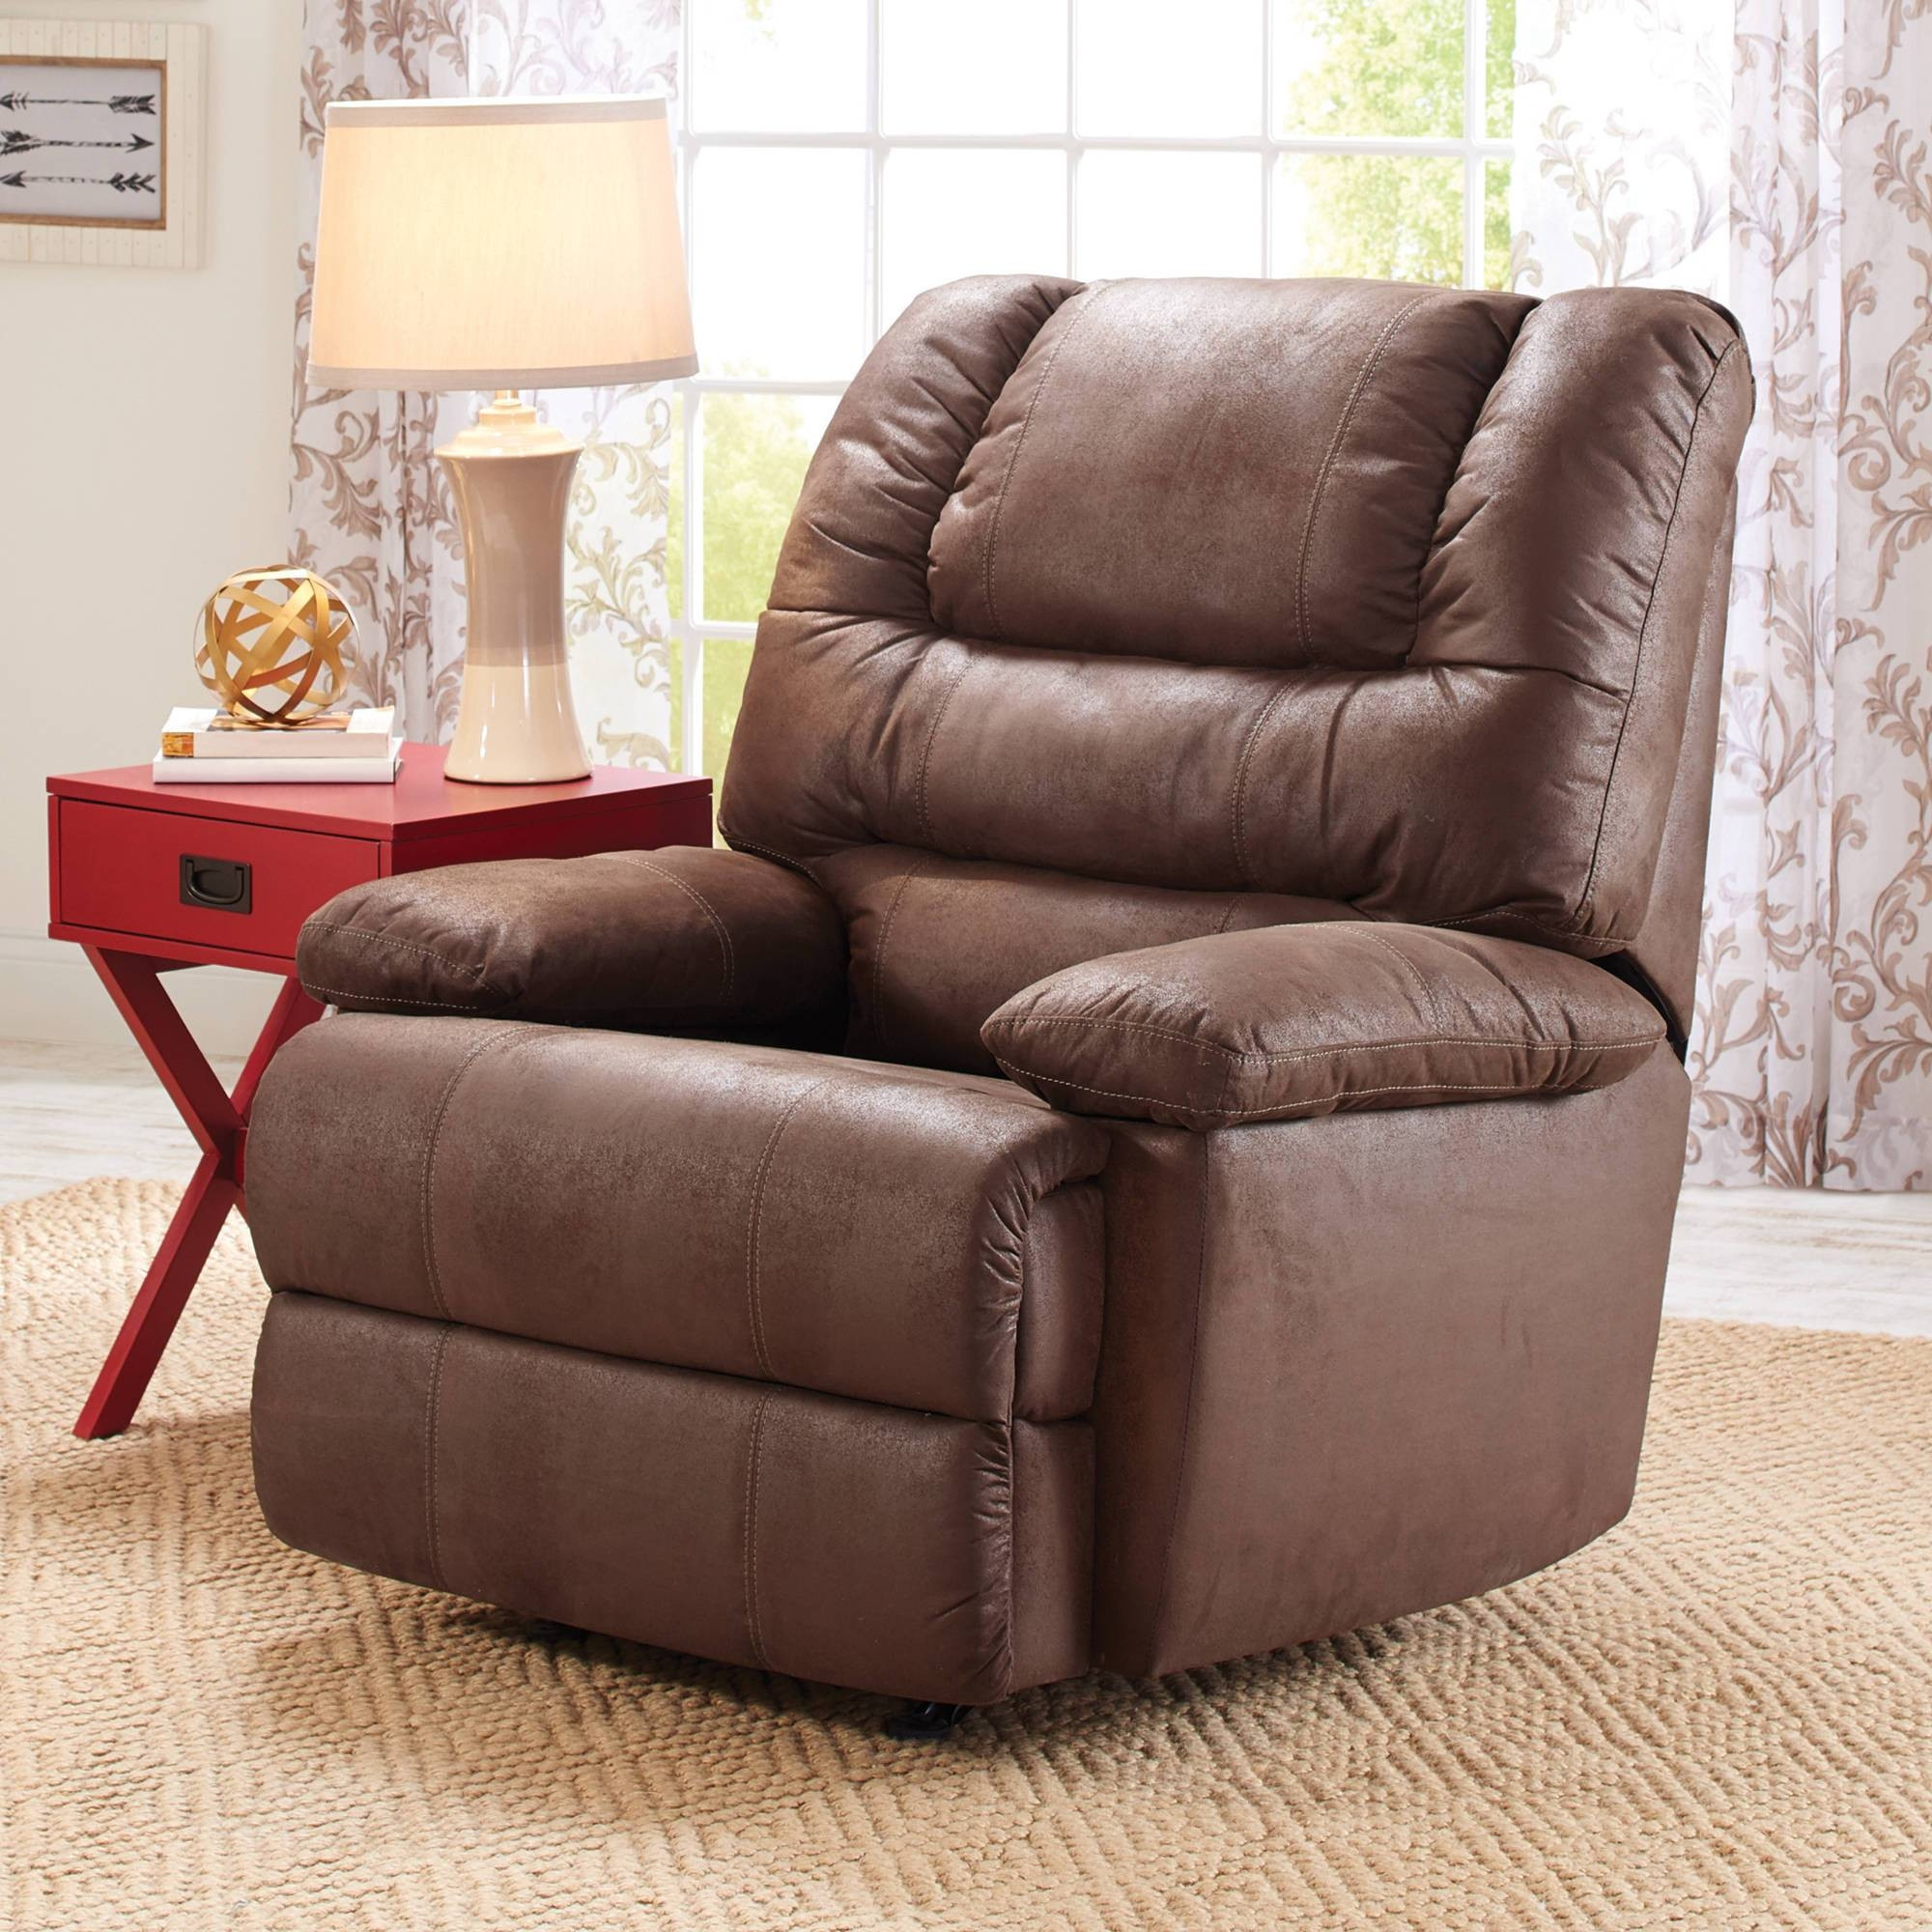 Cheap Chairs For Living Room
 The Best Cool Cheap Sofas